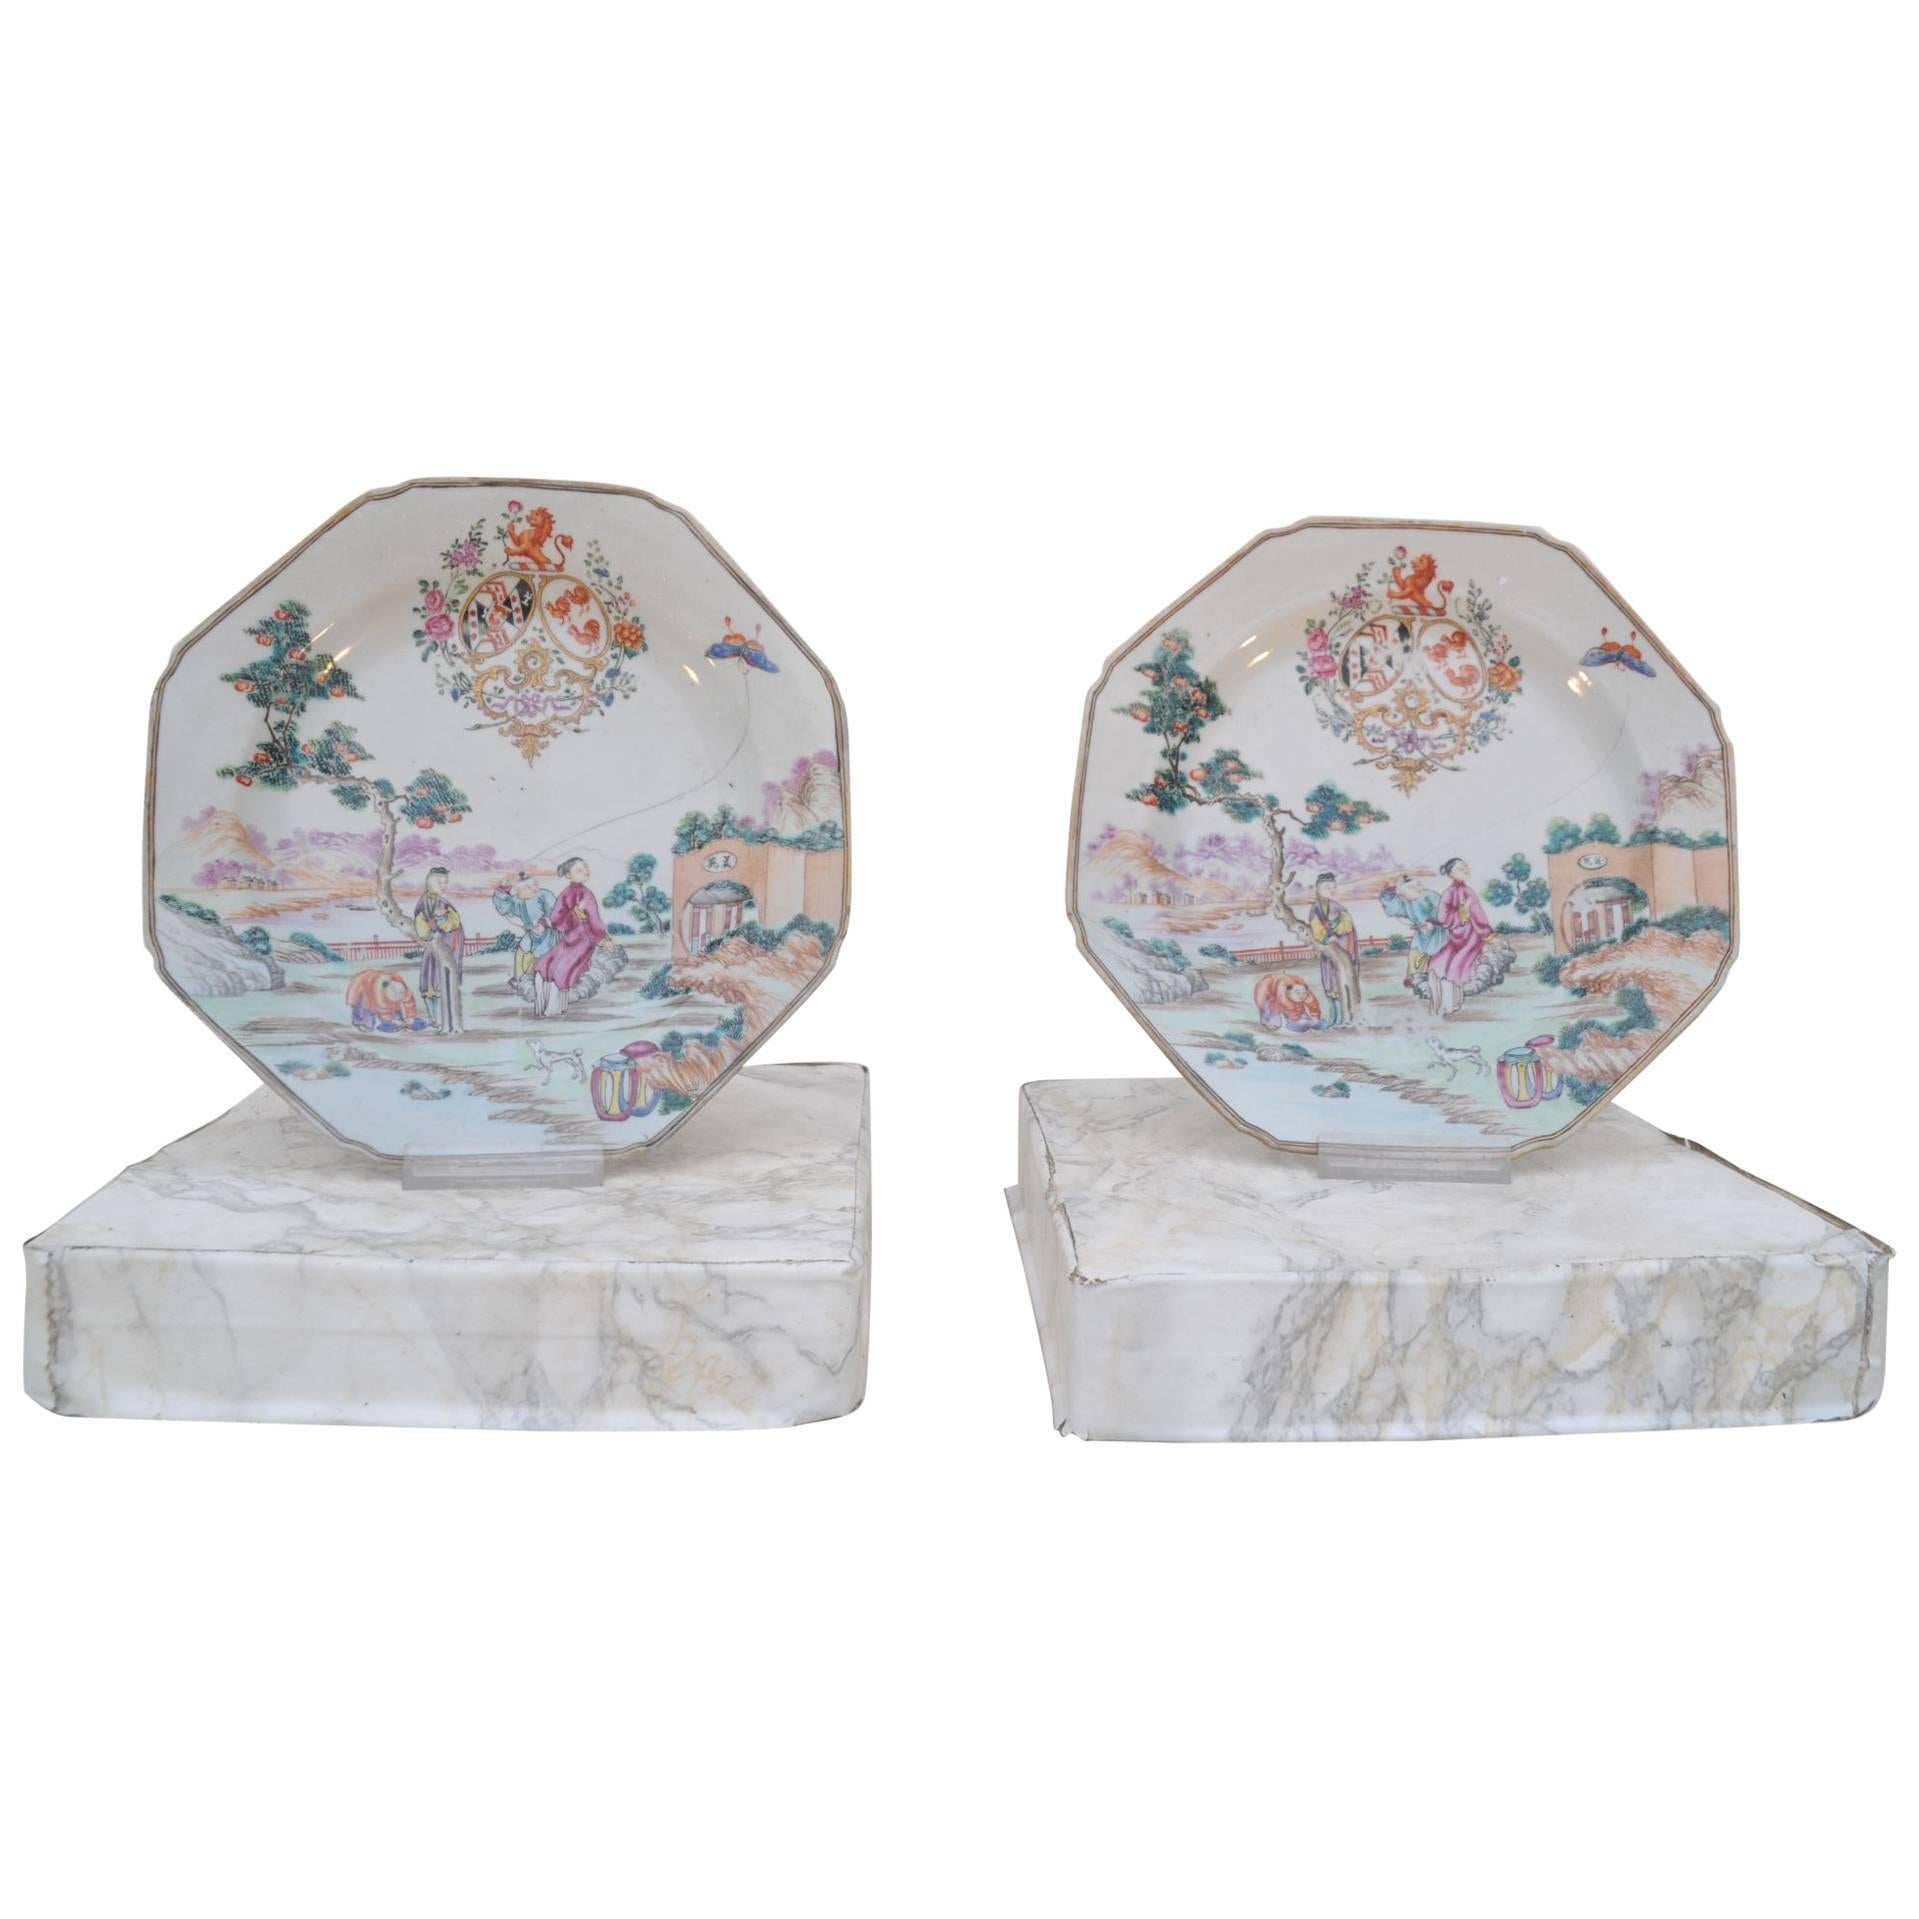  Pair of FAMILLE ROSE ARMORIAL PLATES For Sale